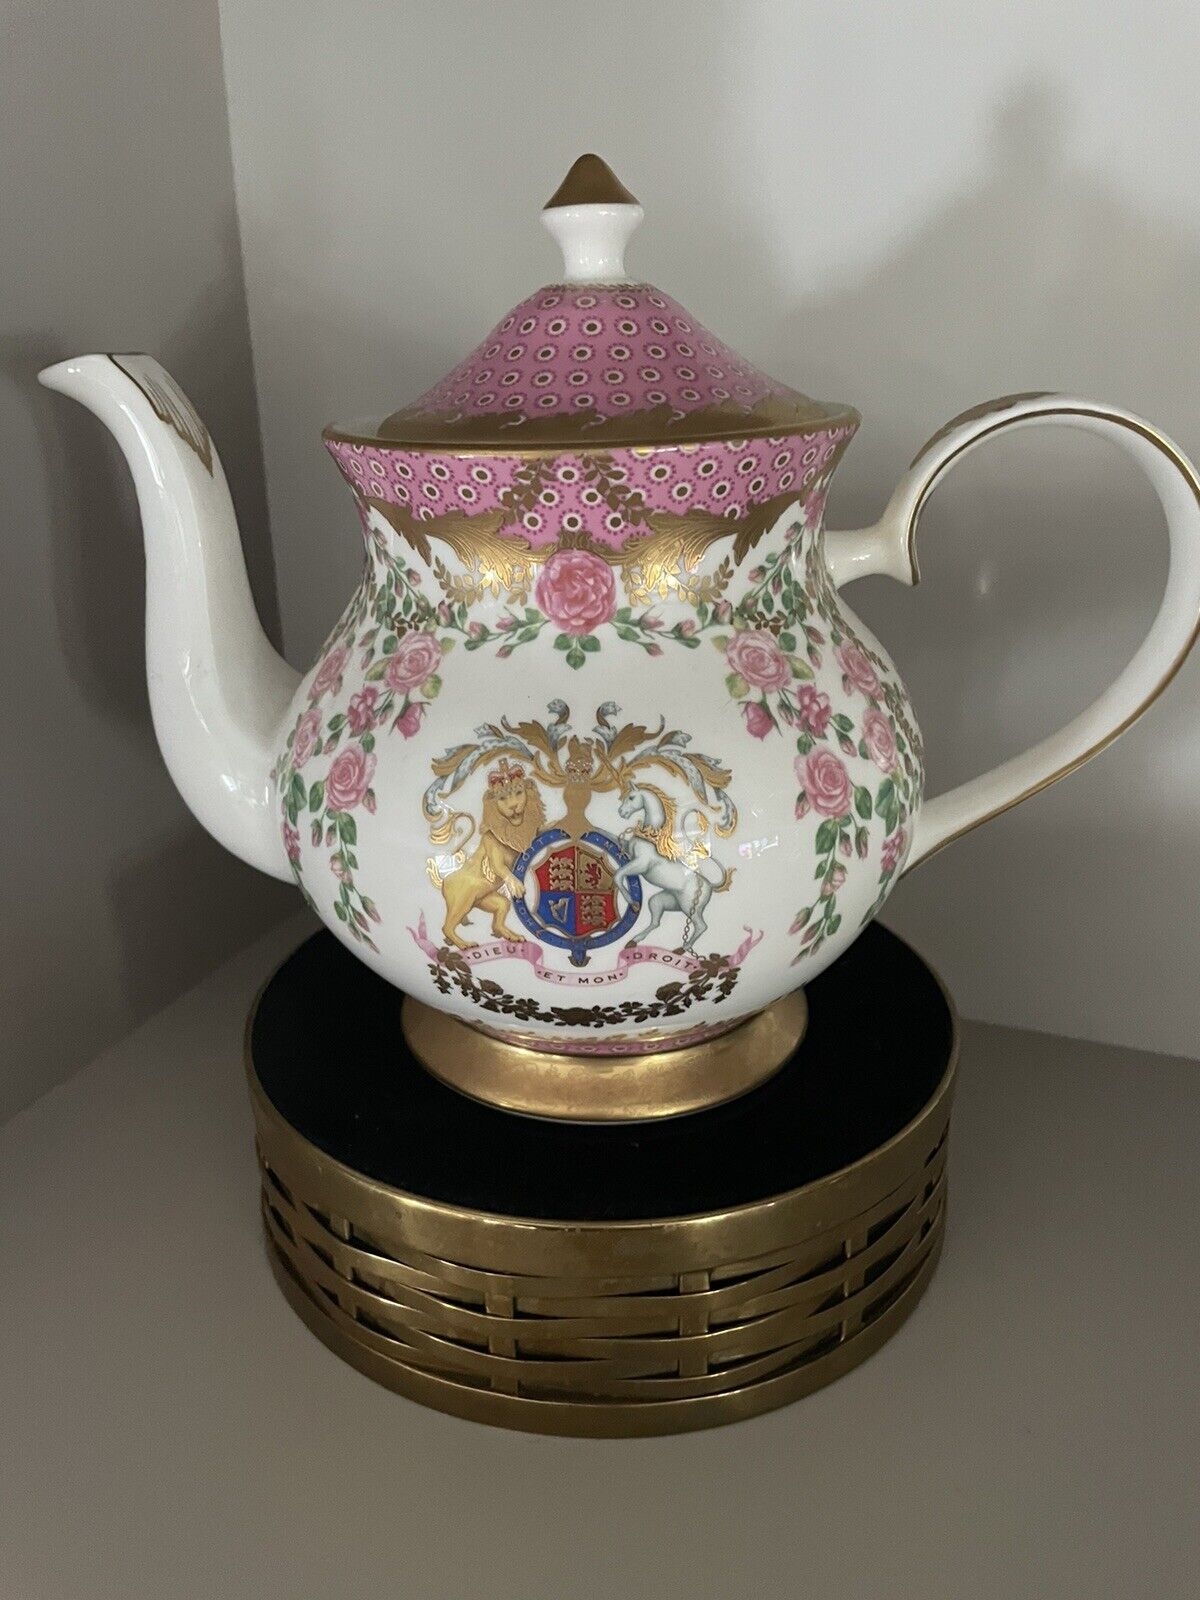 EXTREMELY RARE Queen Elizabeth’s 95th Birthday Buckingham palace China Teapot LE